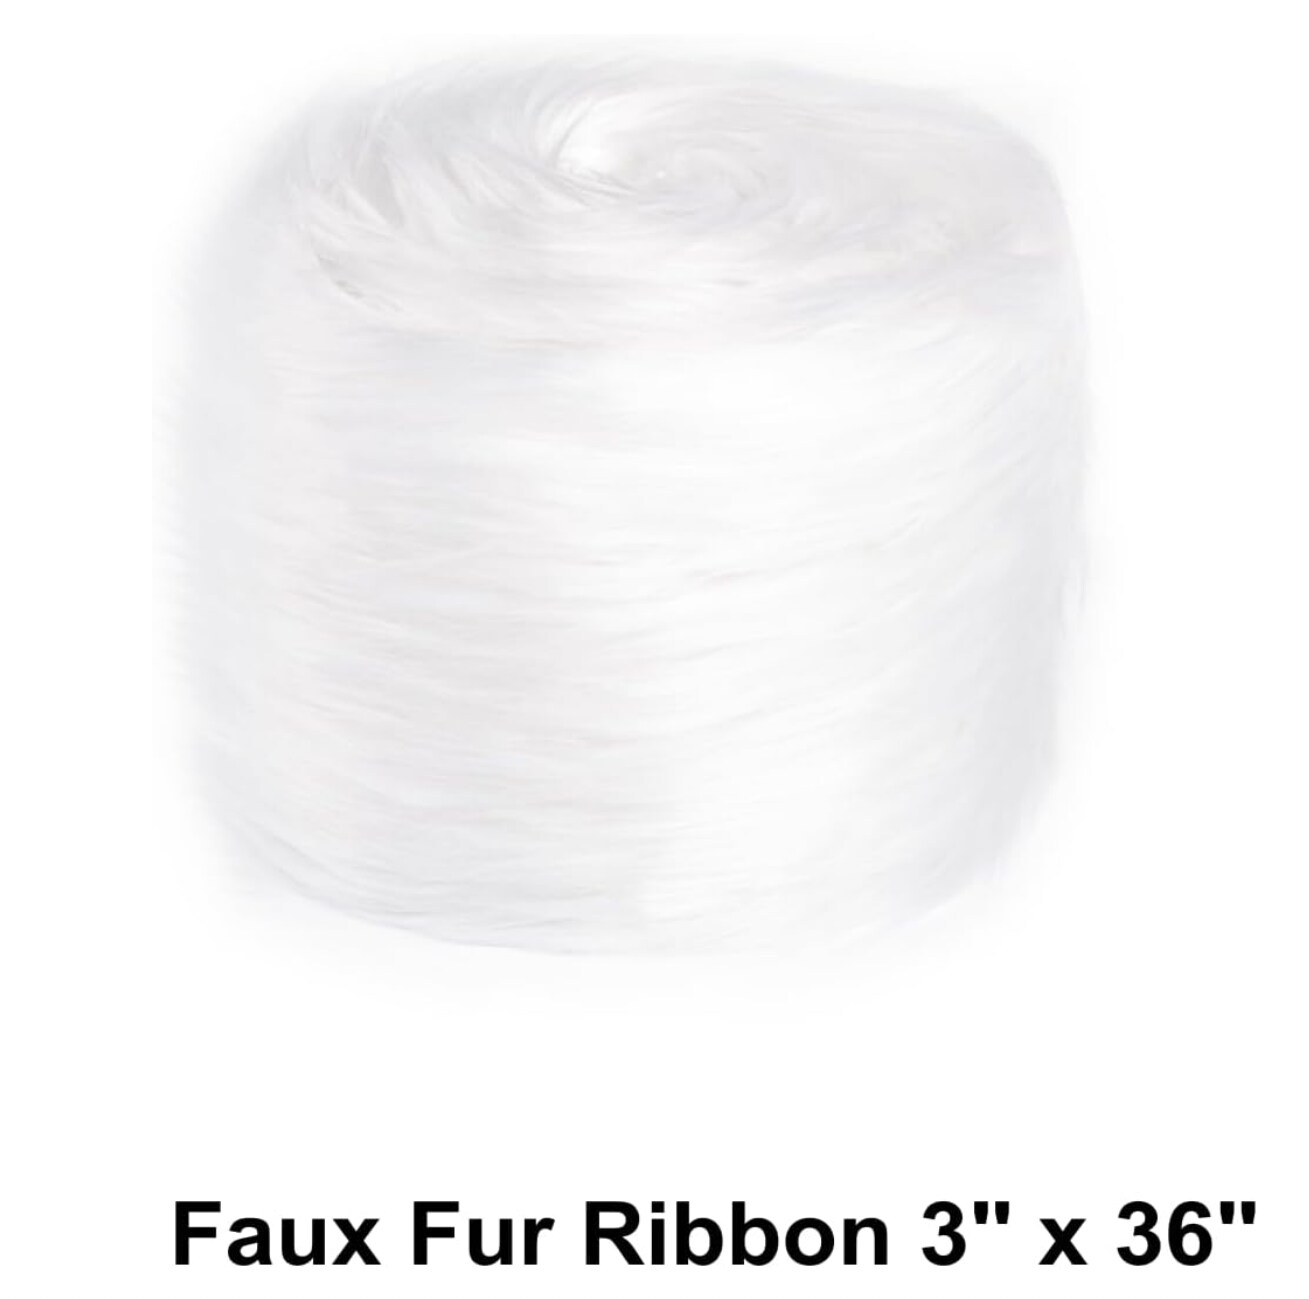 Fake Faux Fur Trimming on Satin Ribbon Trim, 4 Two-Tone and 14 Solid  Colours, Silky Soft Handle Furry Natural Texture, 6-8cm Width